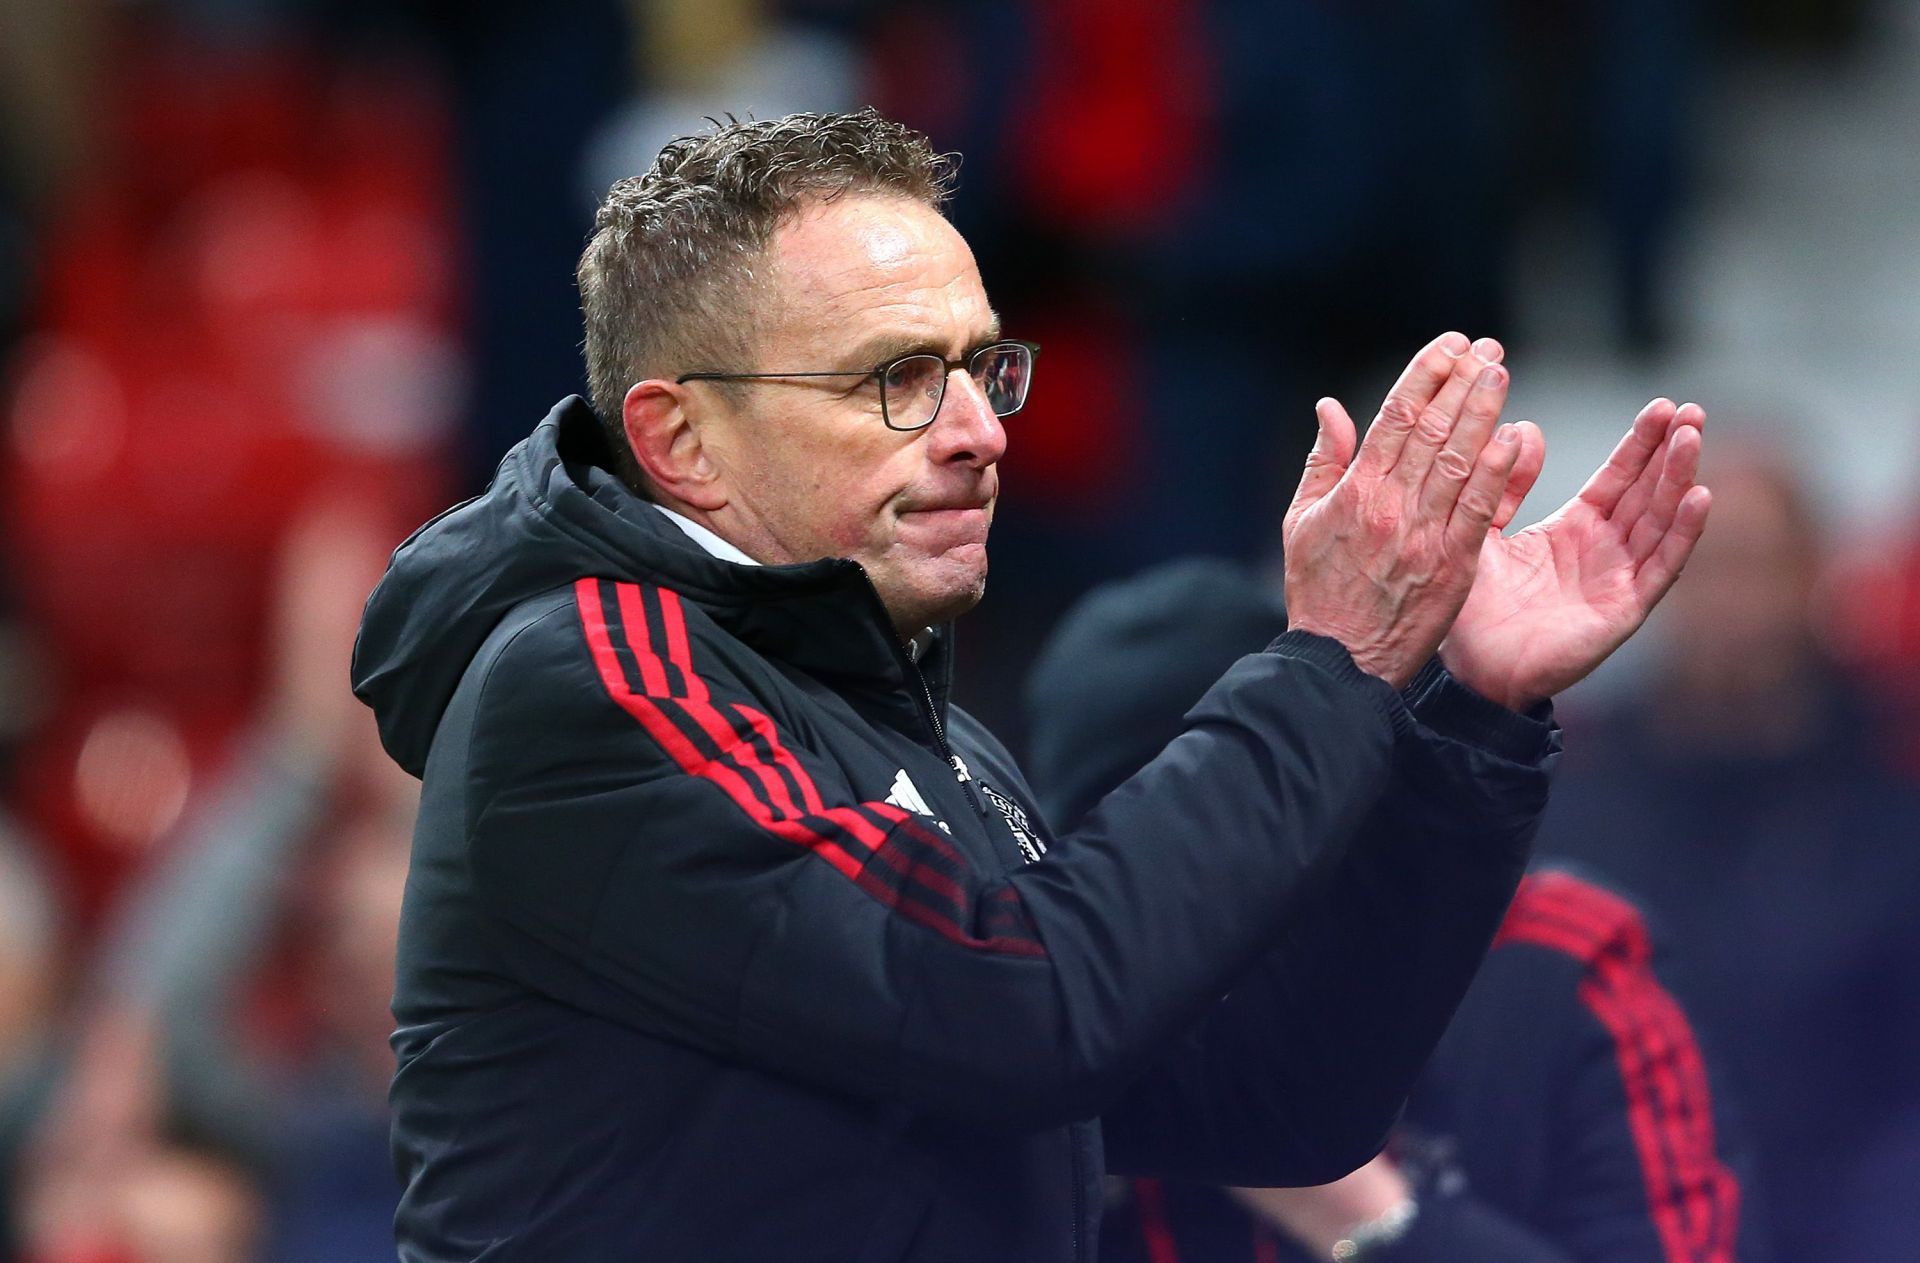 Manchester United interim manager Ralf Rangnick. (Photo by Alex Livesey/Getty Images)